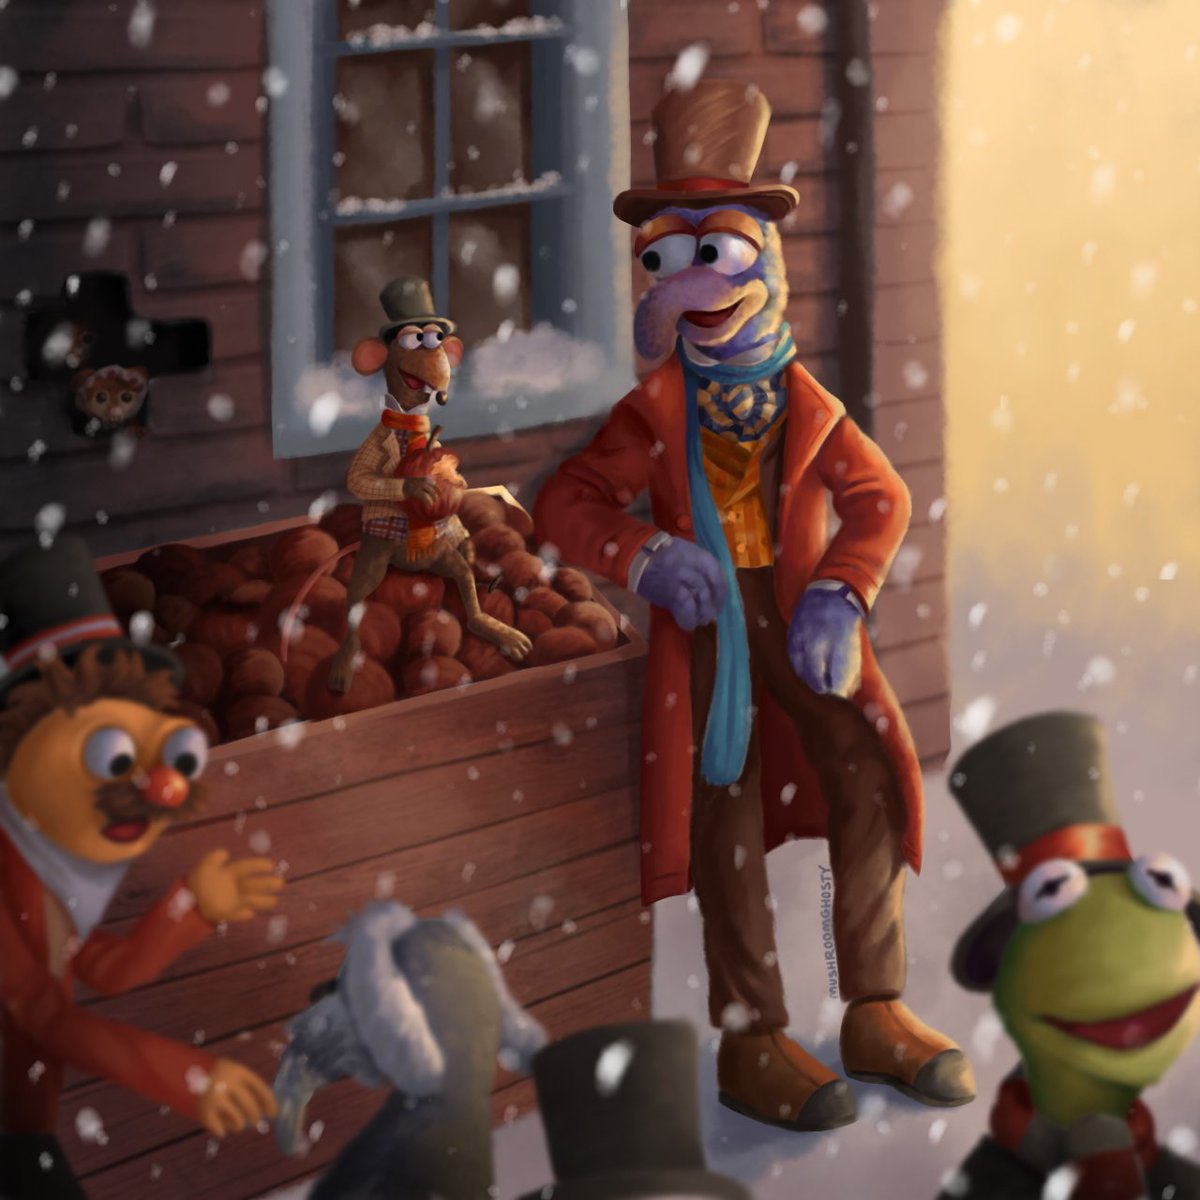 slightly belated painting of my favourite movie the muppets christmas carol !! 🎄 rts very appreciated :')